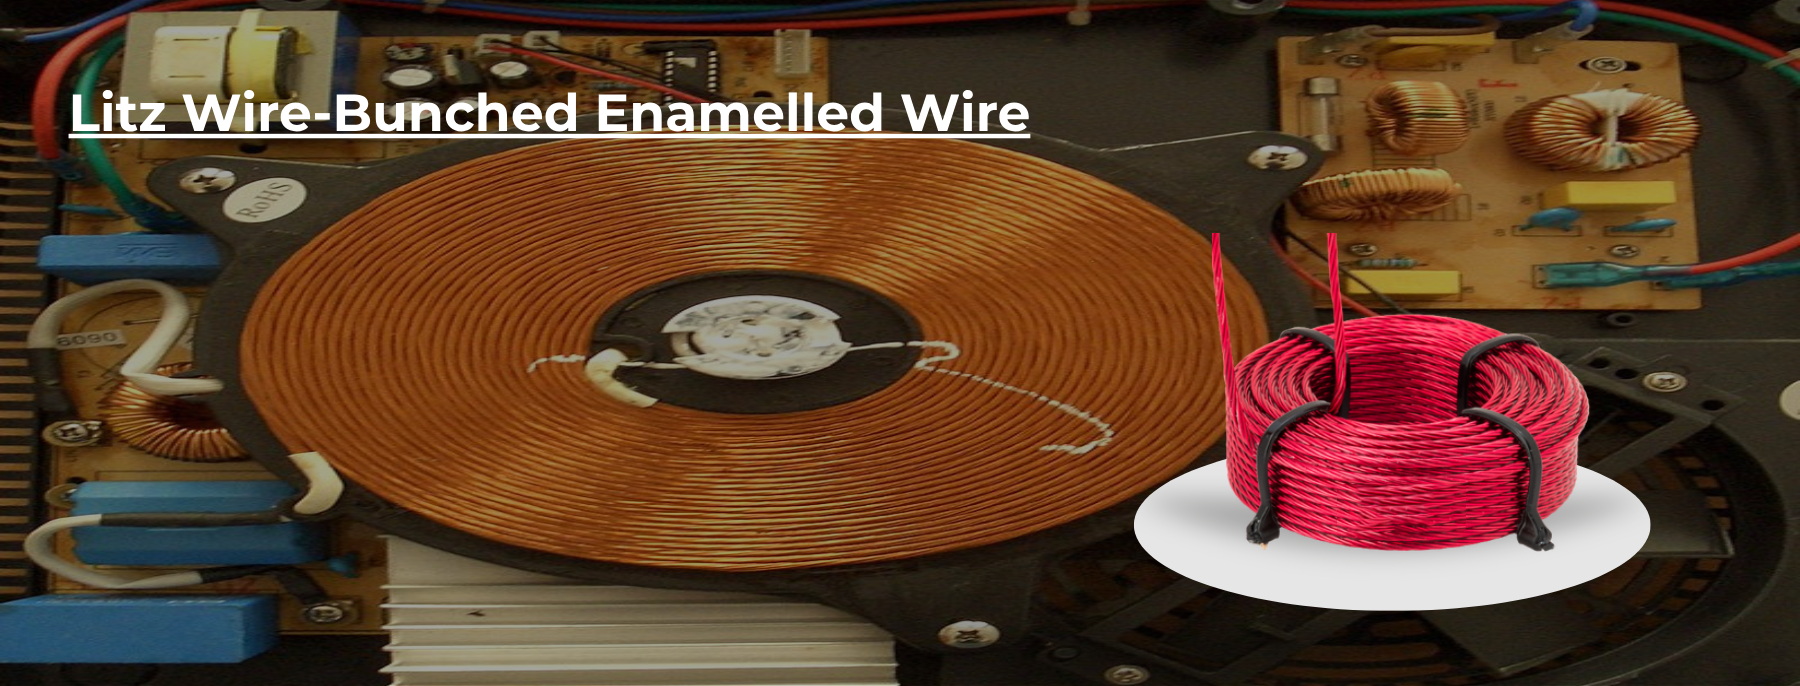 Litz Wire-Bunched Enamelled Wire